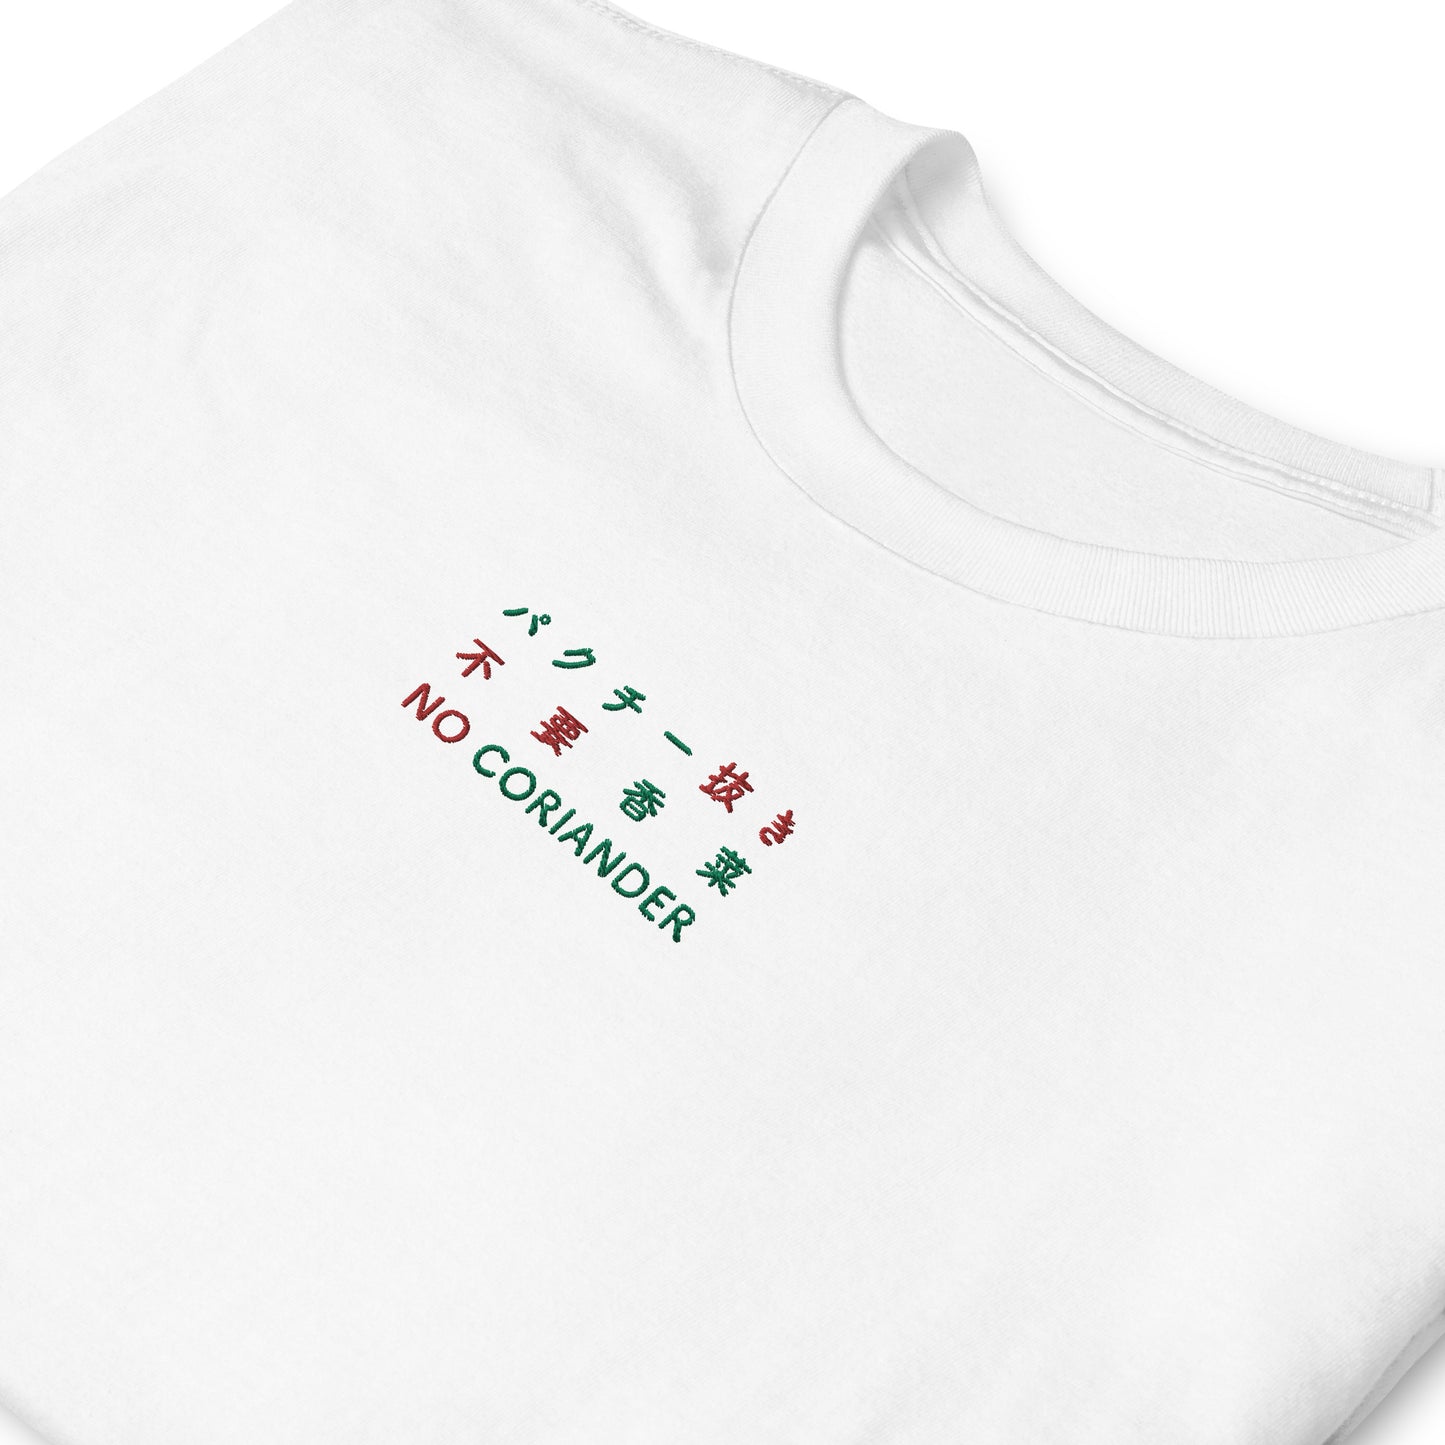 White High Quality Tee - Front Design with Red/Green Embroidery "NO CORIANDER" in three languages